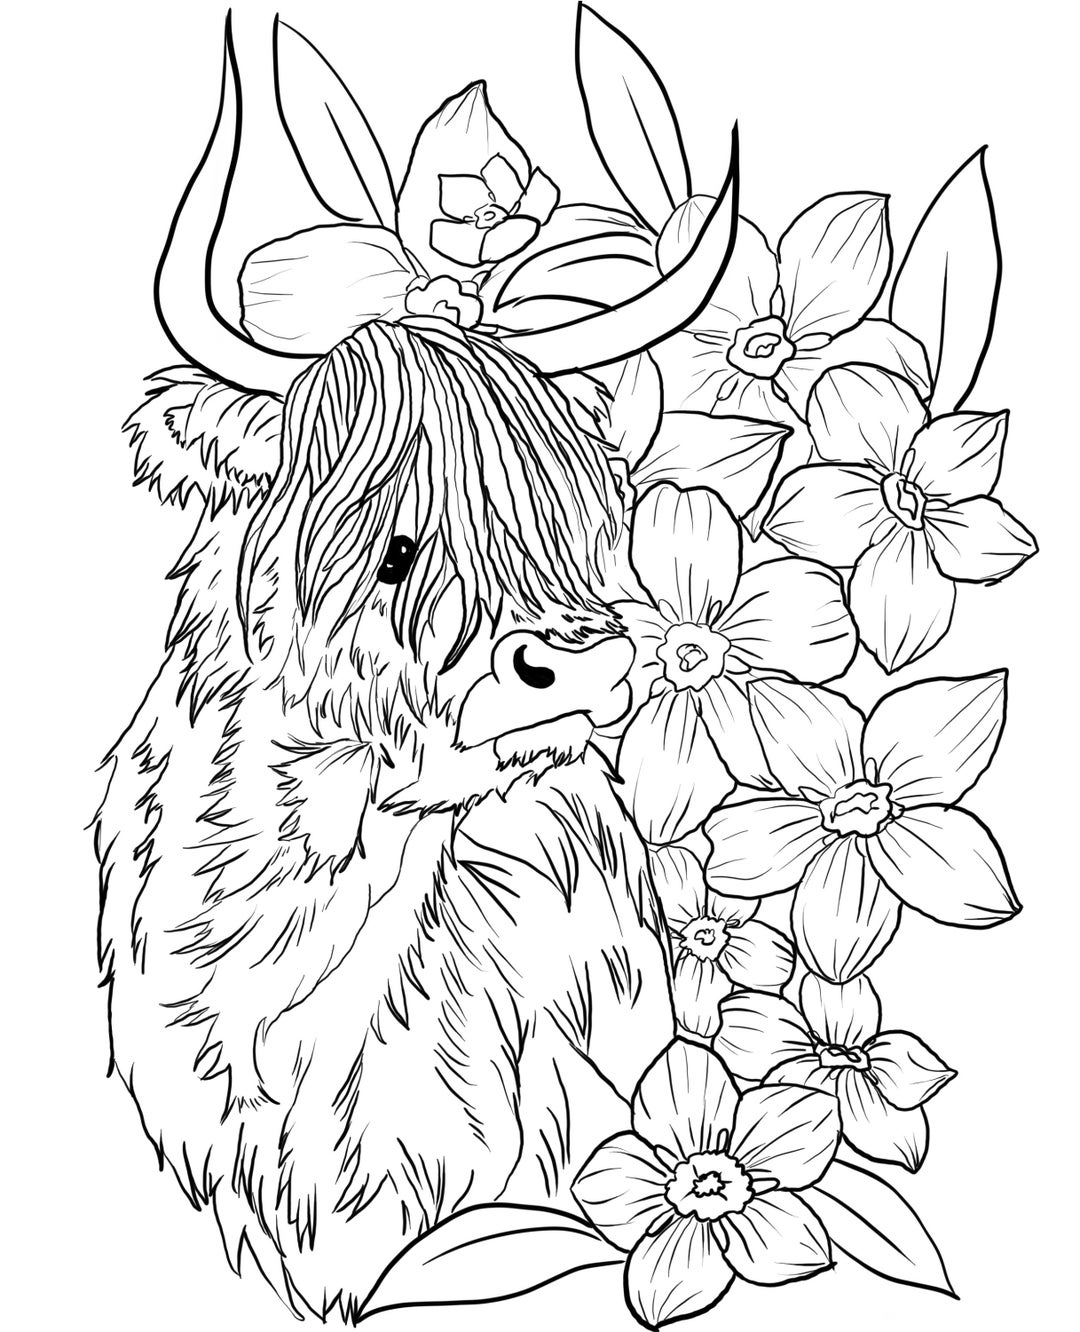 buy-highland-cow-downloadable-coloring-page-online-in-india-etsy